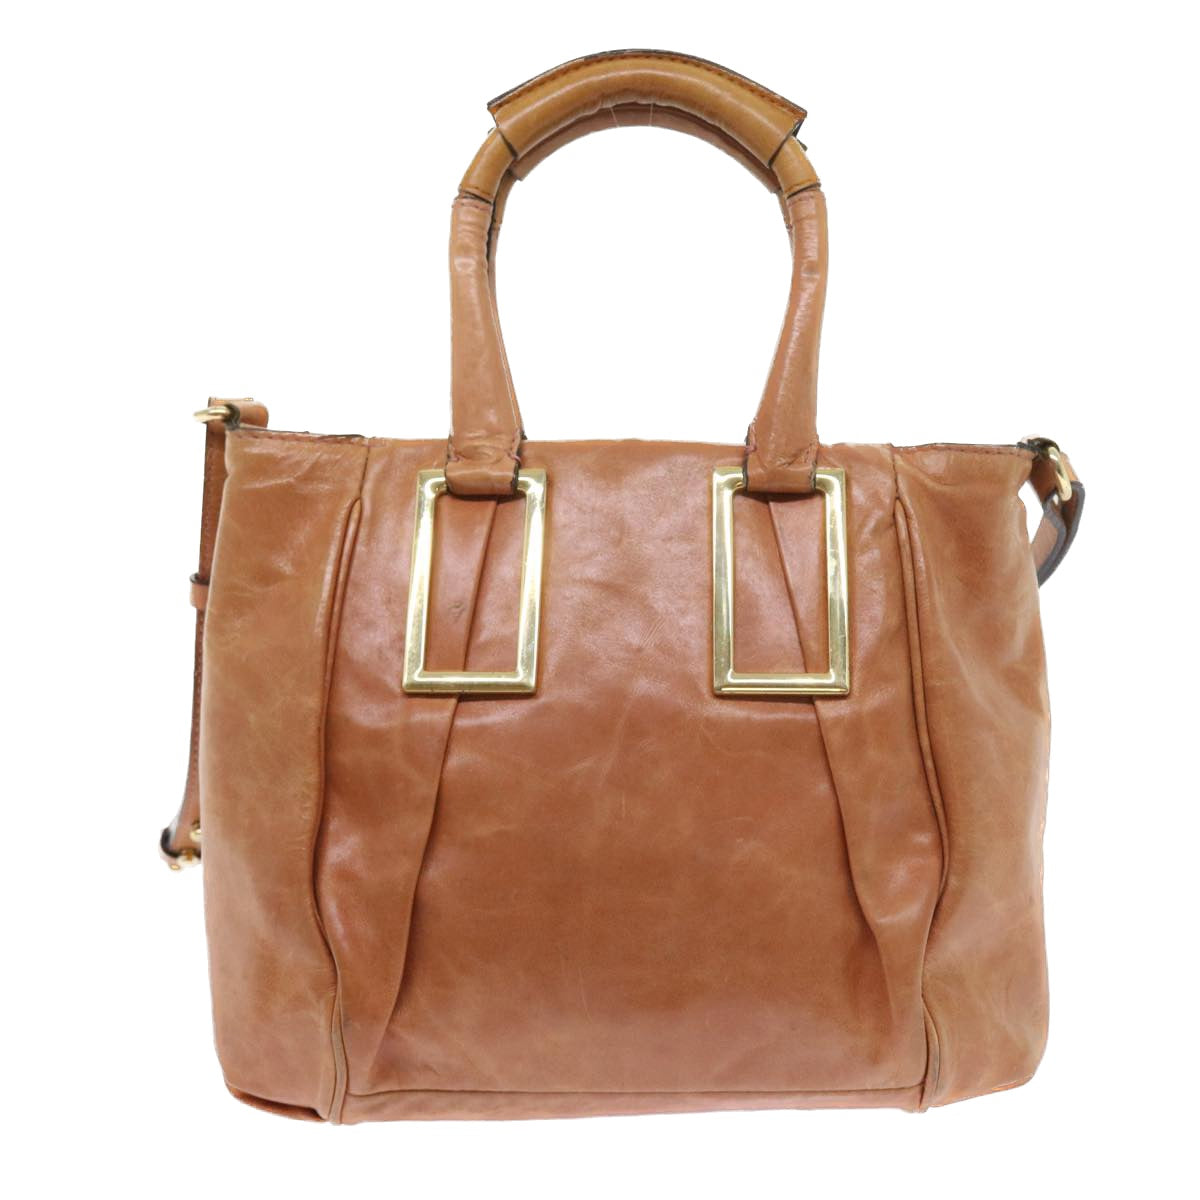 Chloe Etel Hand Bag Leather 2way Brown Auth bs8592